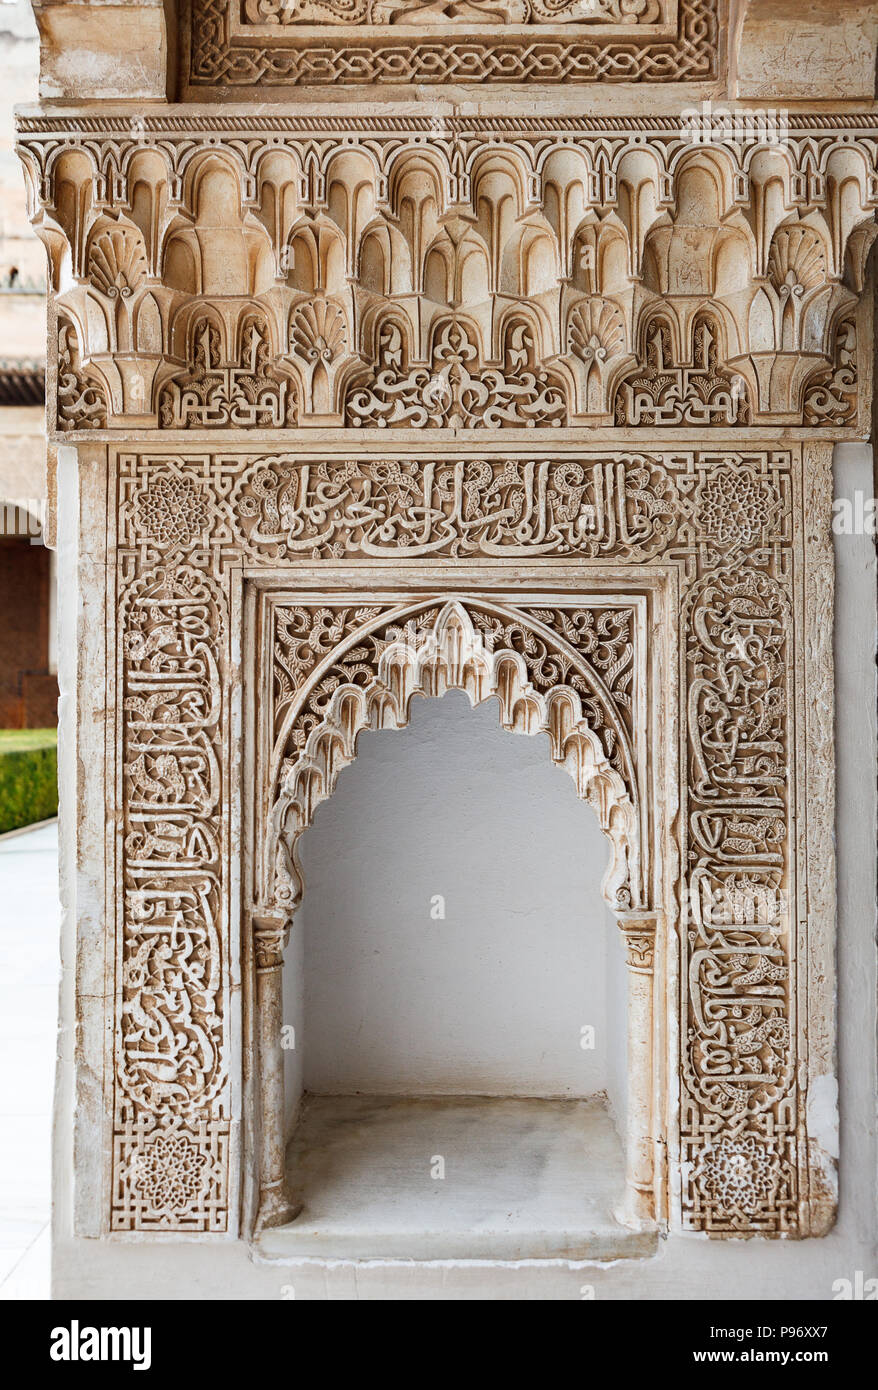 Interior of Alhambra, Granada, Andalusia, Spain. Muqarnas ceiling decoration  and arabesques Stock Photo - Alamy